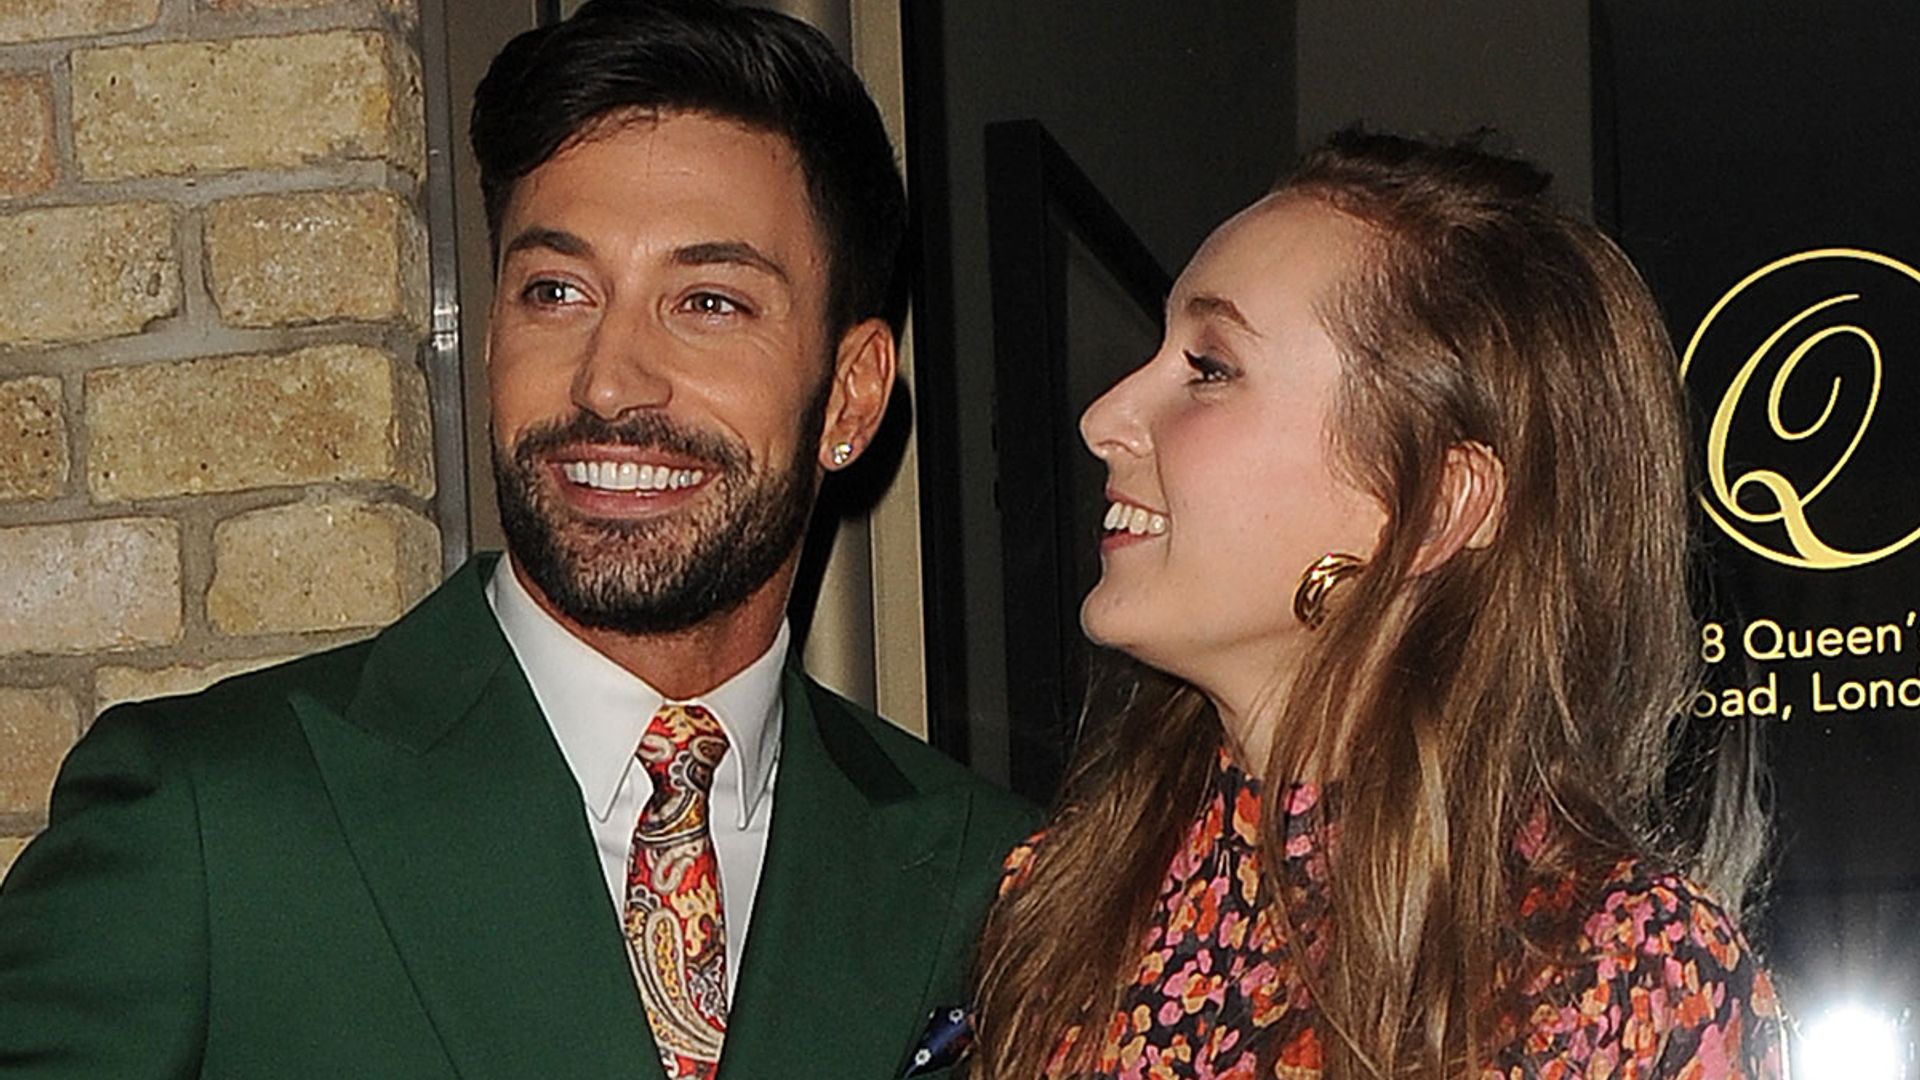 Strictly's Rose Ayling-Ellis treated to surprising birthday cake by Giovanni Pernice